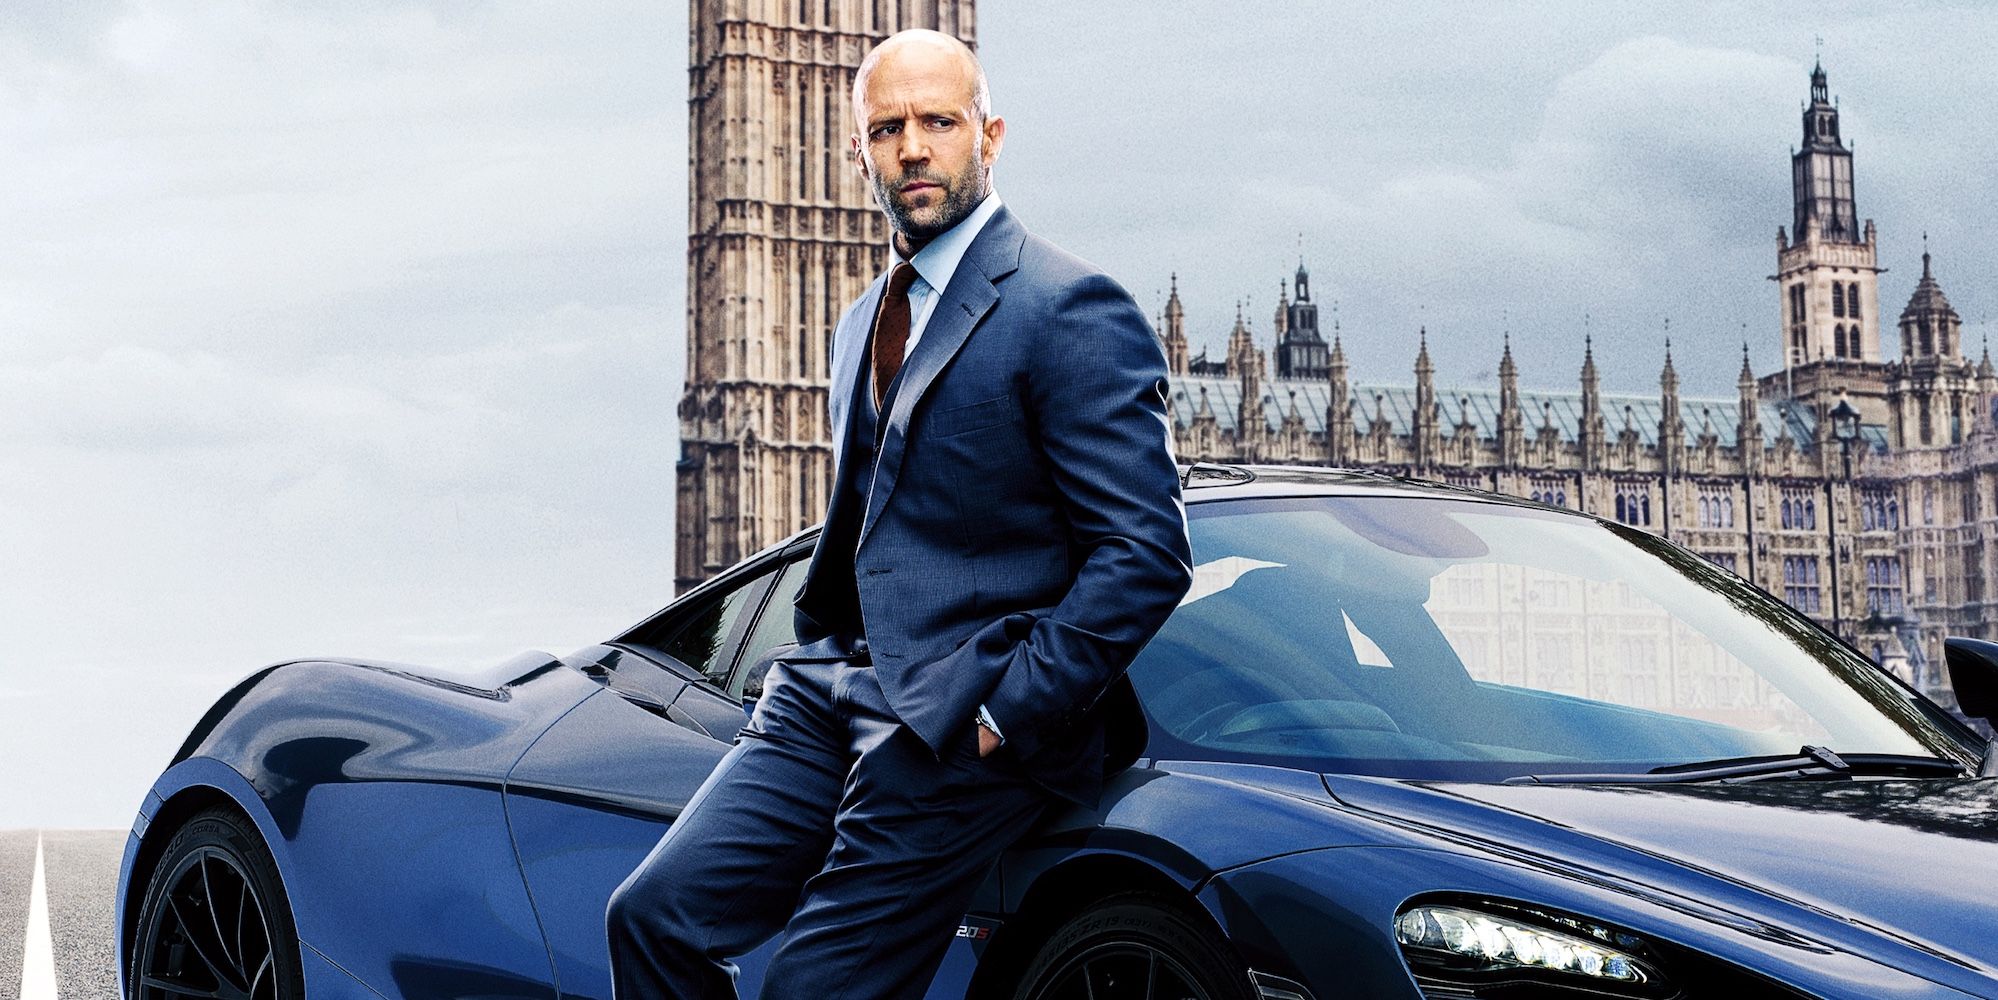 Jason Statham on the Hobbs and Shaw poster with McClaren and Big Ben